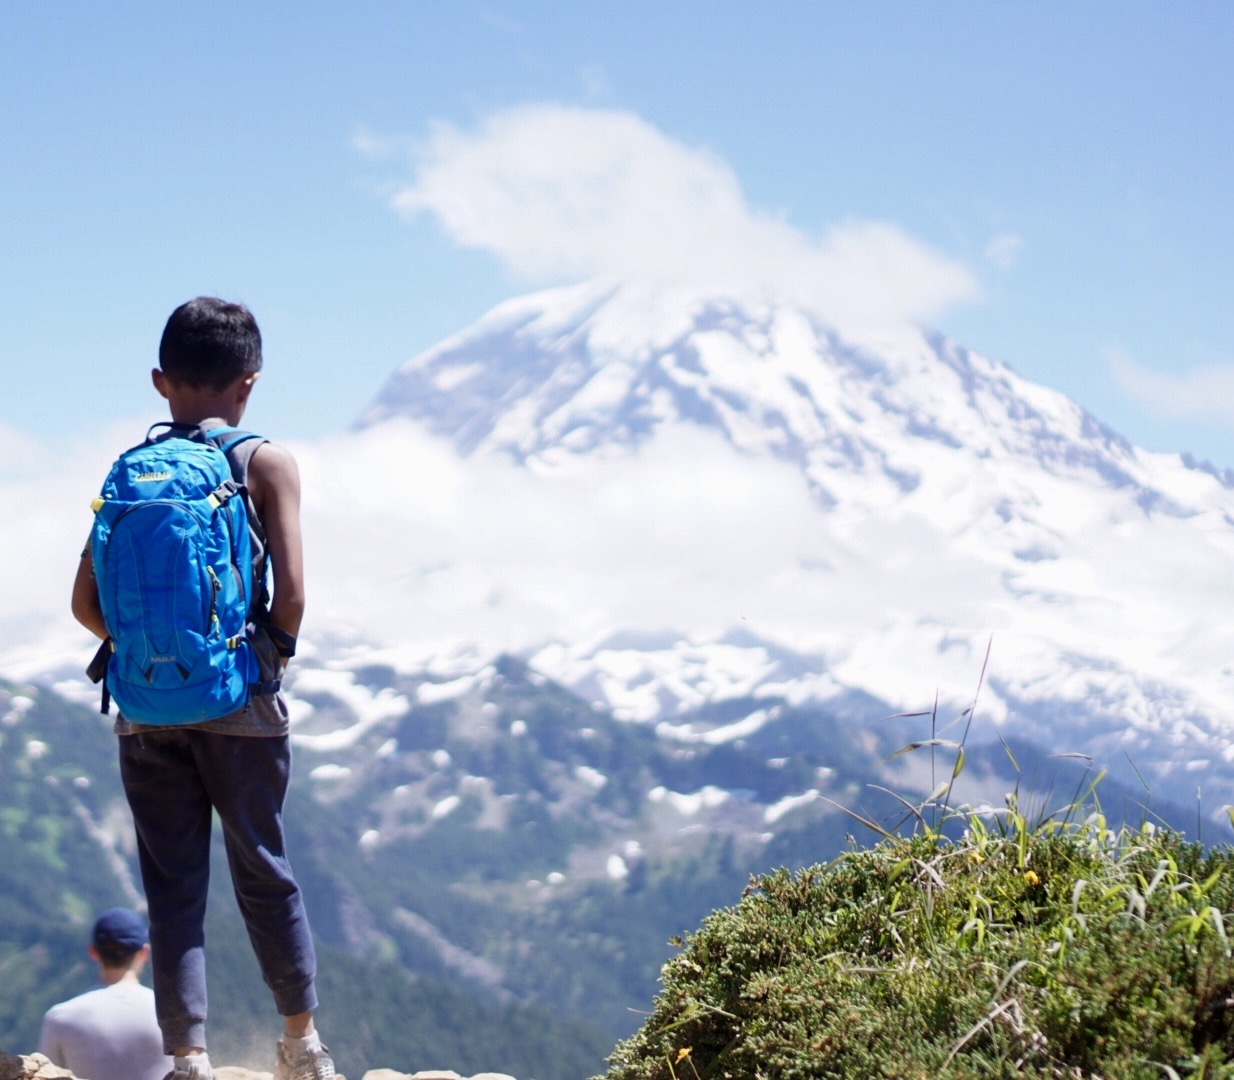 A boy on a hike looking at Mount Rainier.